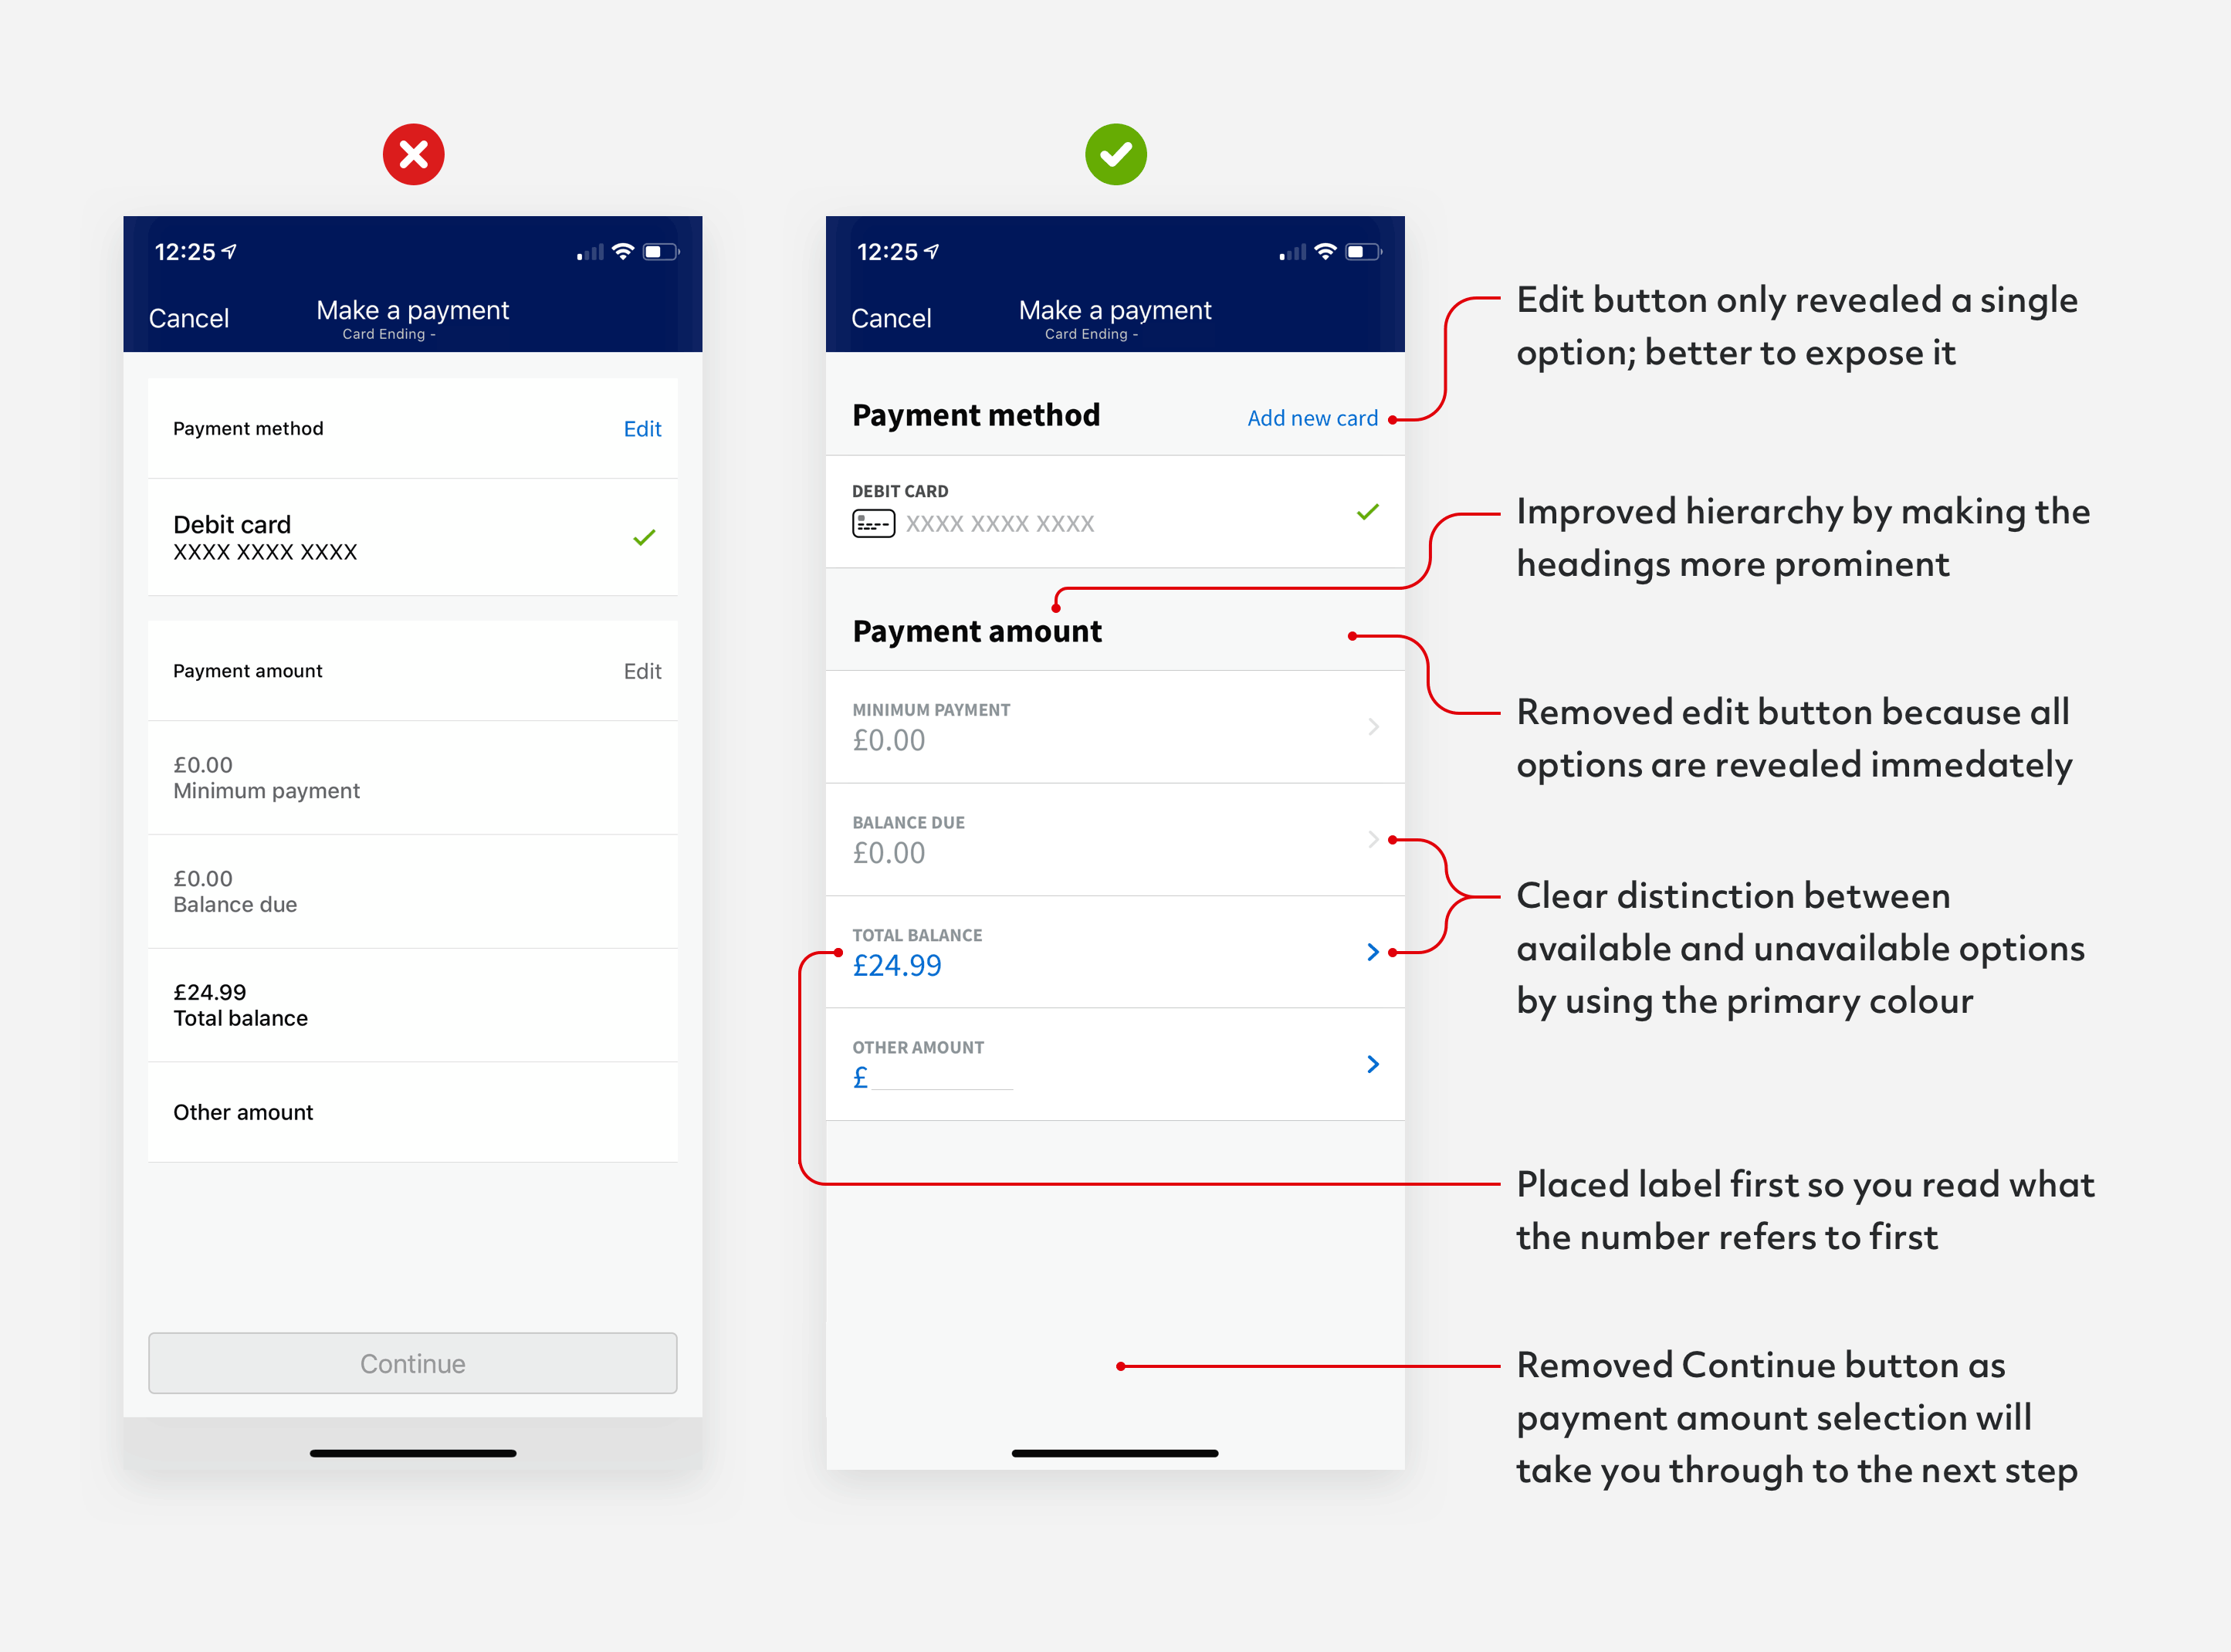 amex-app-payment-flow-redesign-step-1.png